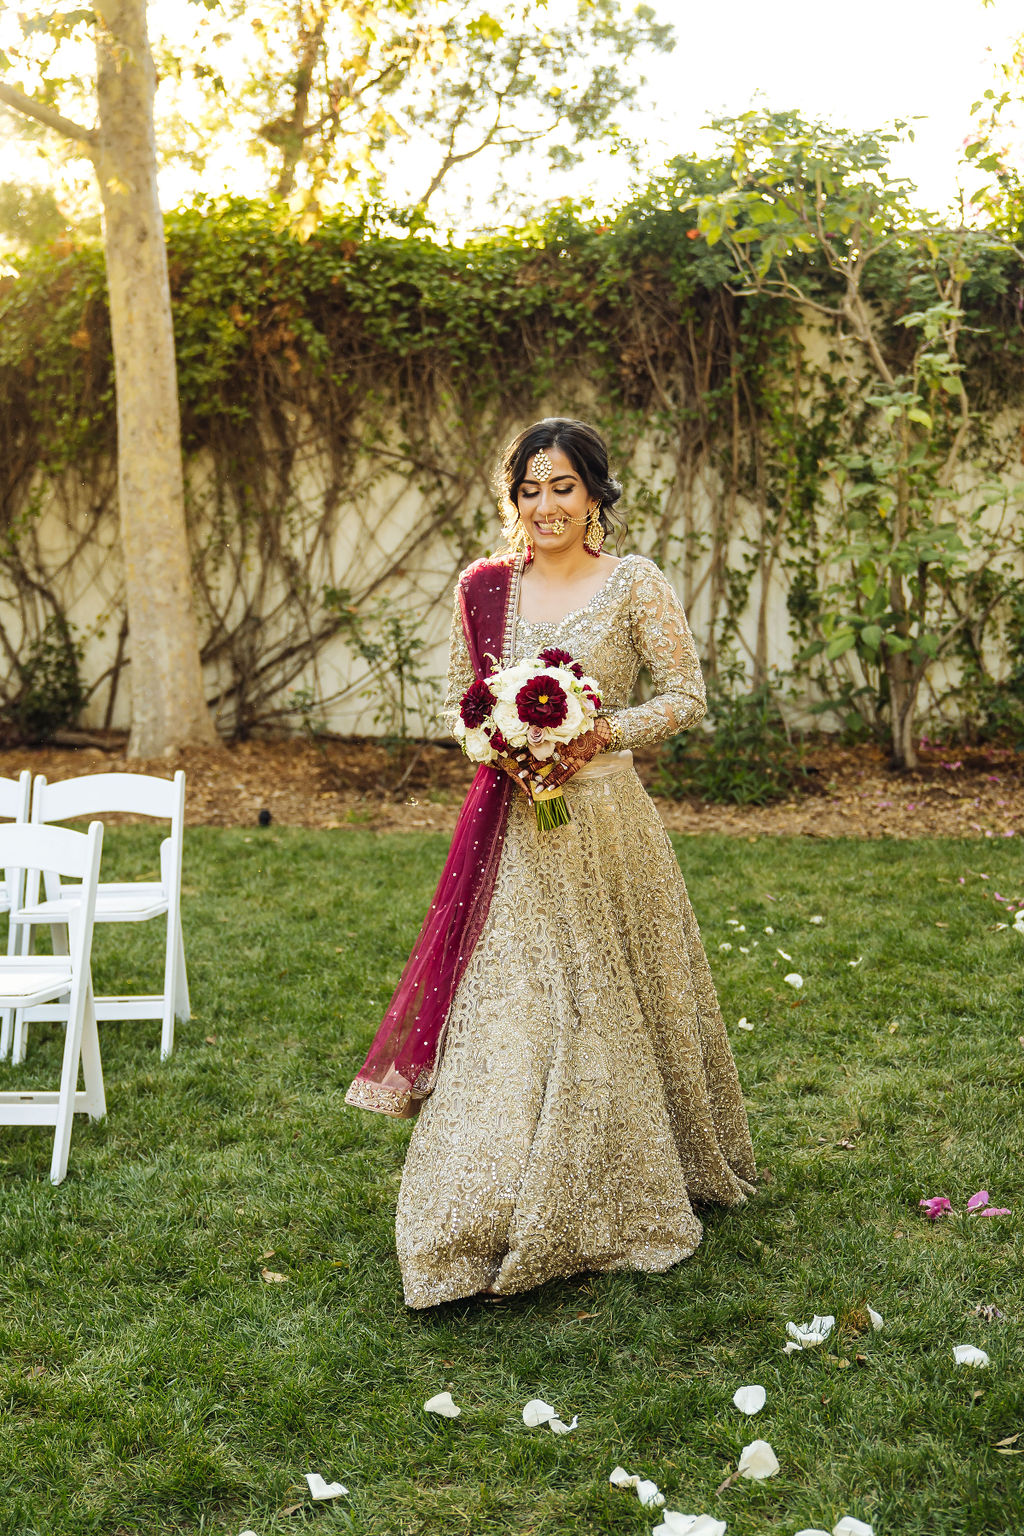 bride in embellished gold wedding saree and maroon sash walks down the aisle